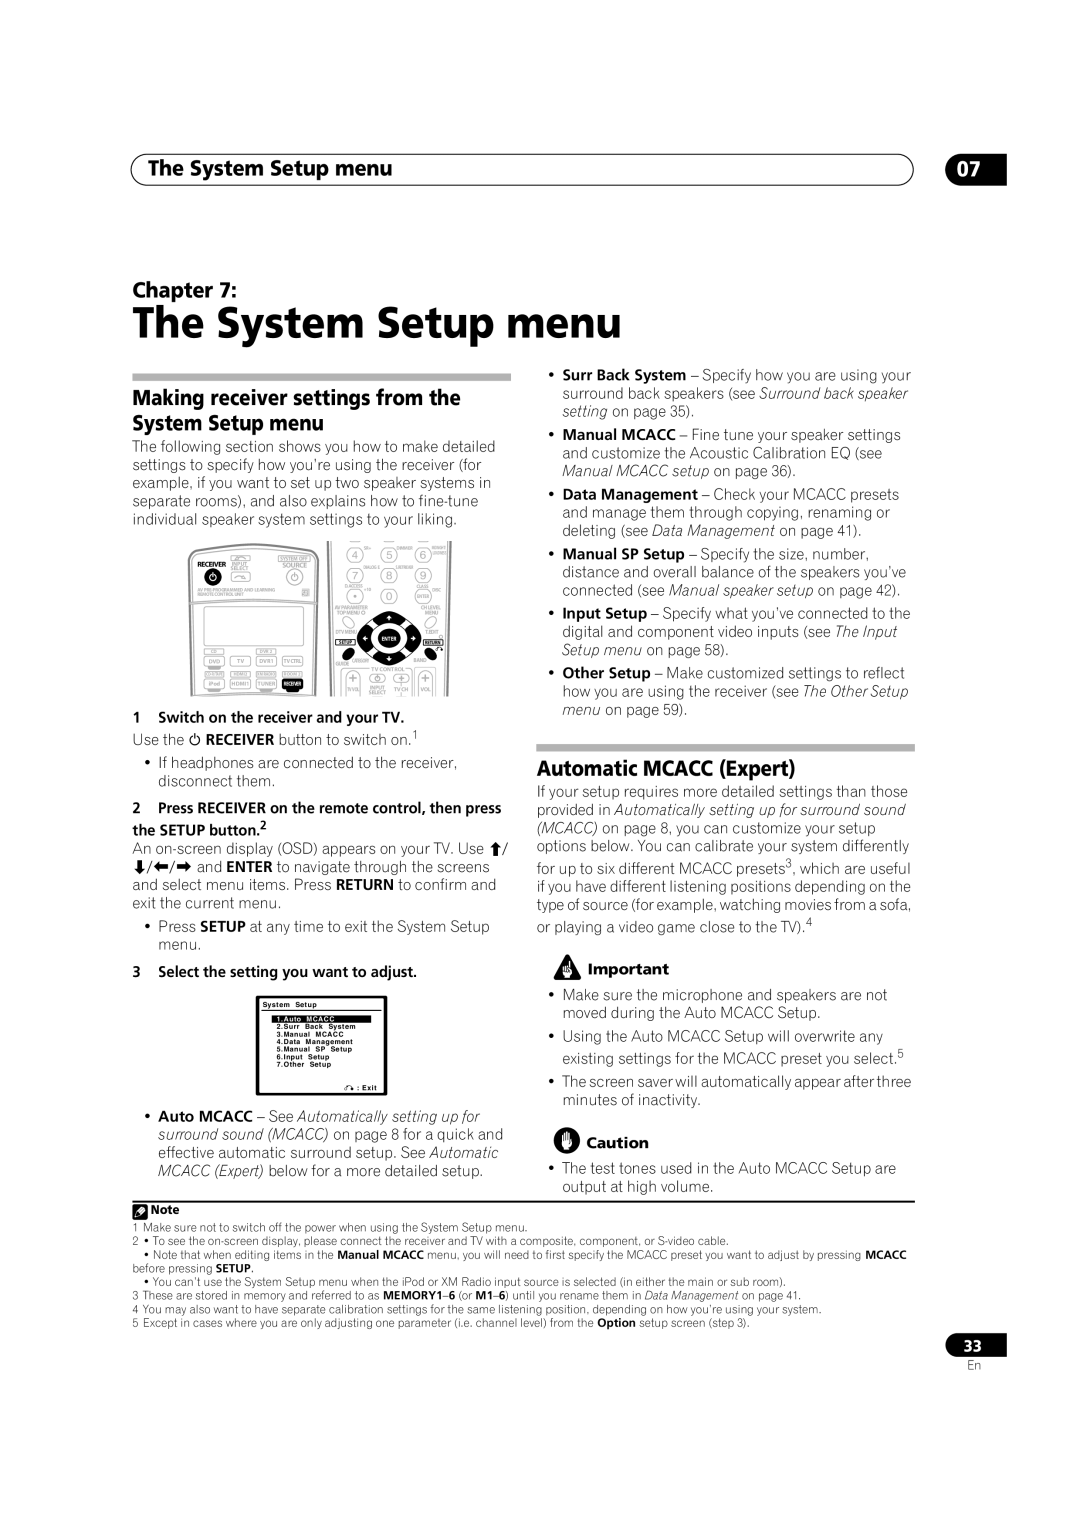 Pioneer VSX-9110TXV-K operating instructions The System Setup menu, Automatic MCACC Expert, Chapter 